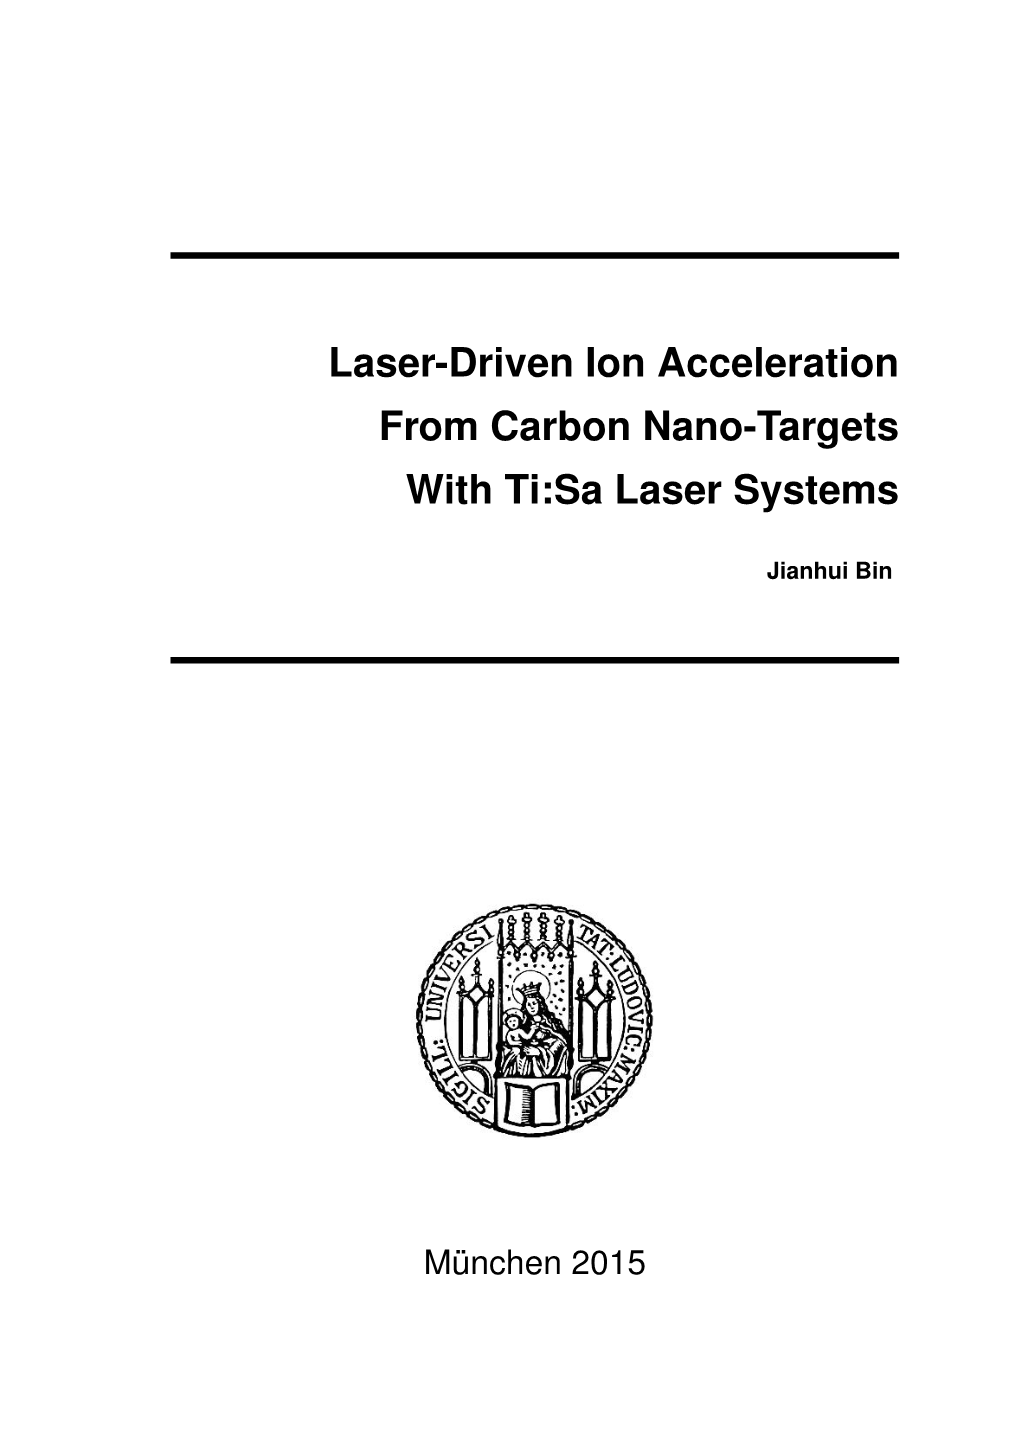 Laser-Driven Ion Acceleration from Carbon Nano-Targets with Ti:Sa Laser Systems